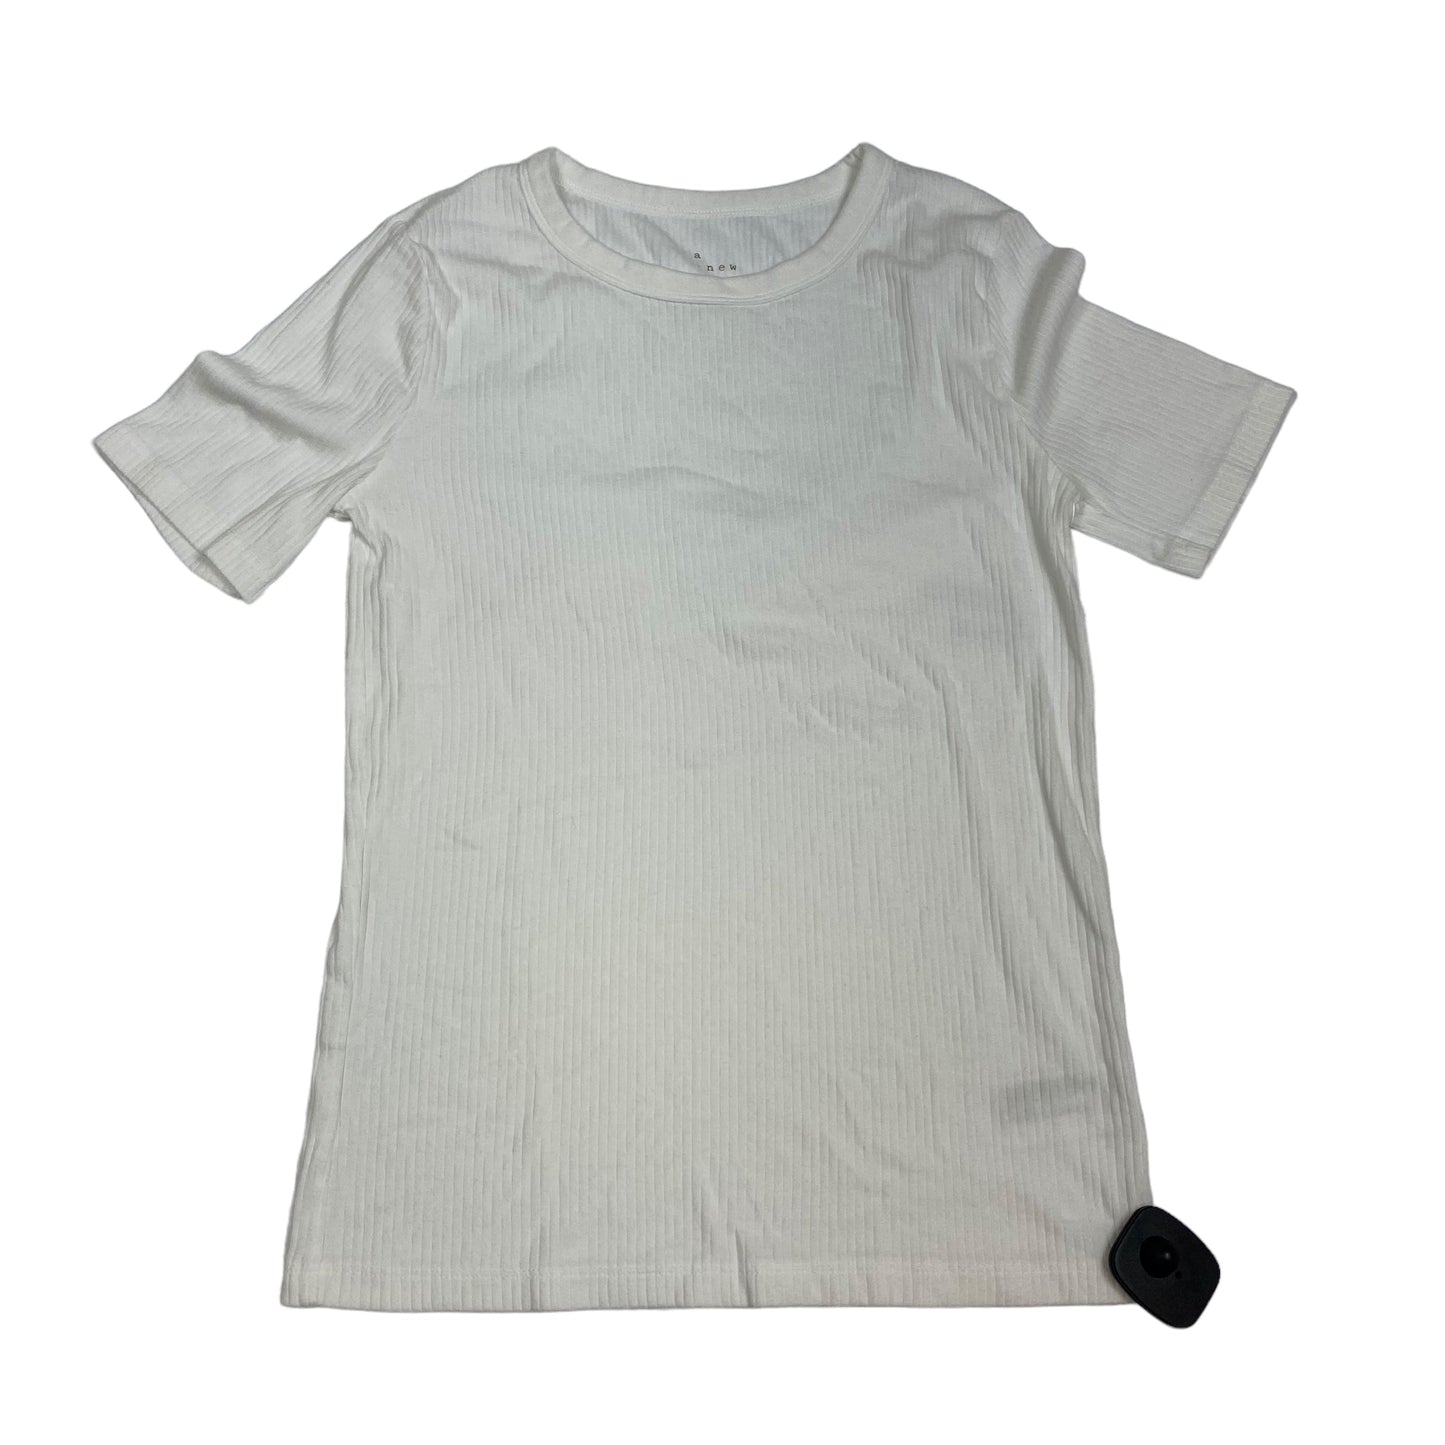 White Top Short Sleeve Basic A New Day, Size M